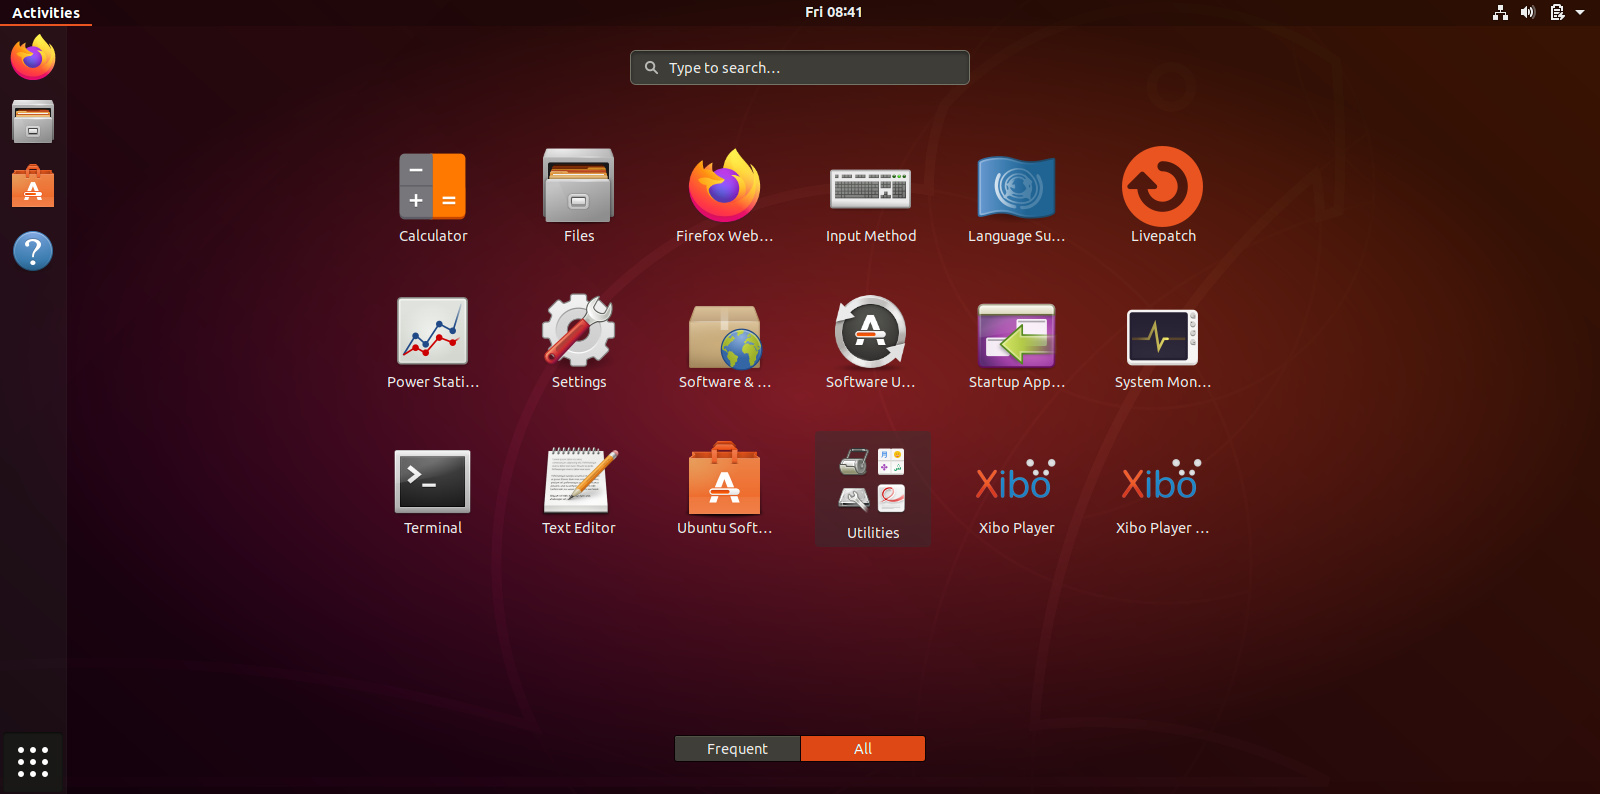 How to autostart xibo on system boots up? - Xibo Player for Linux ...